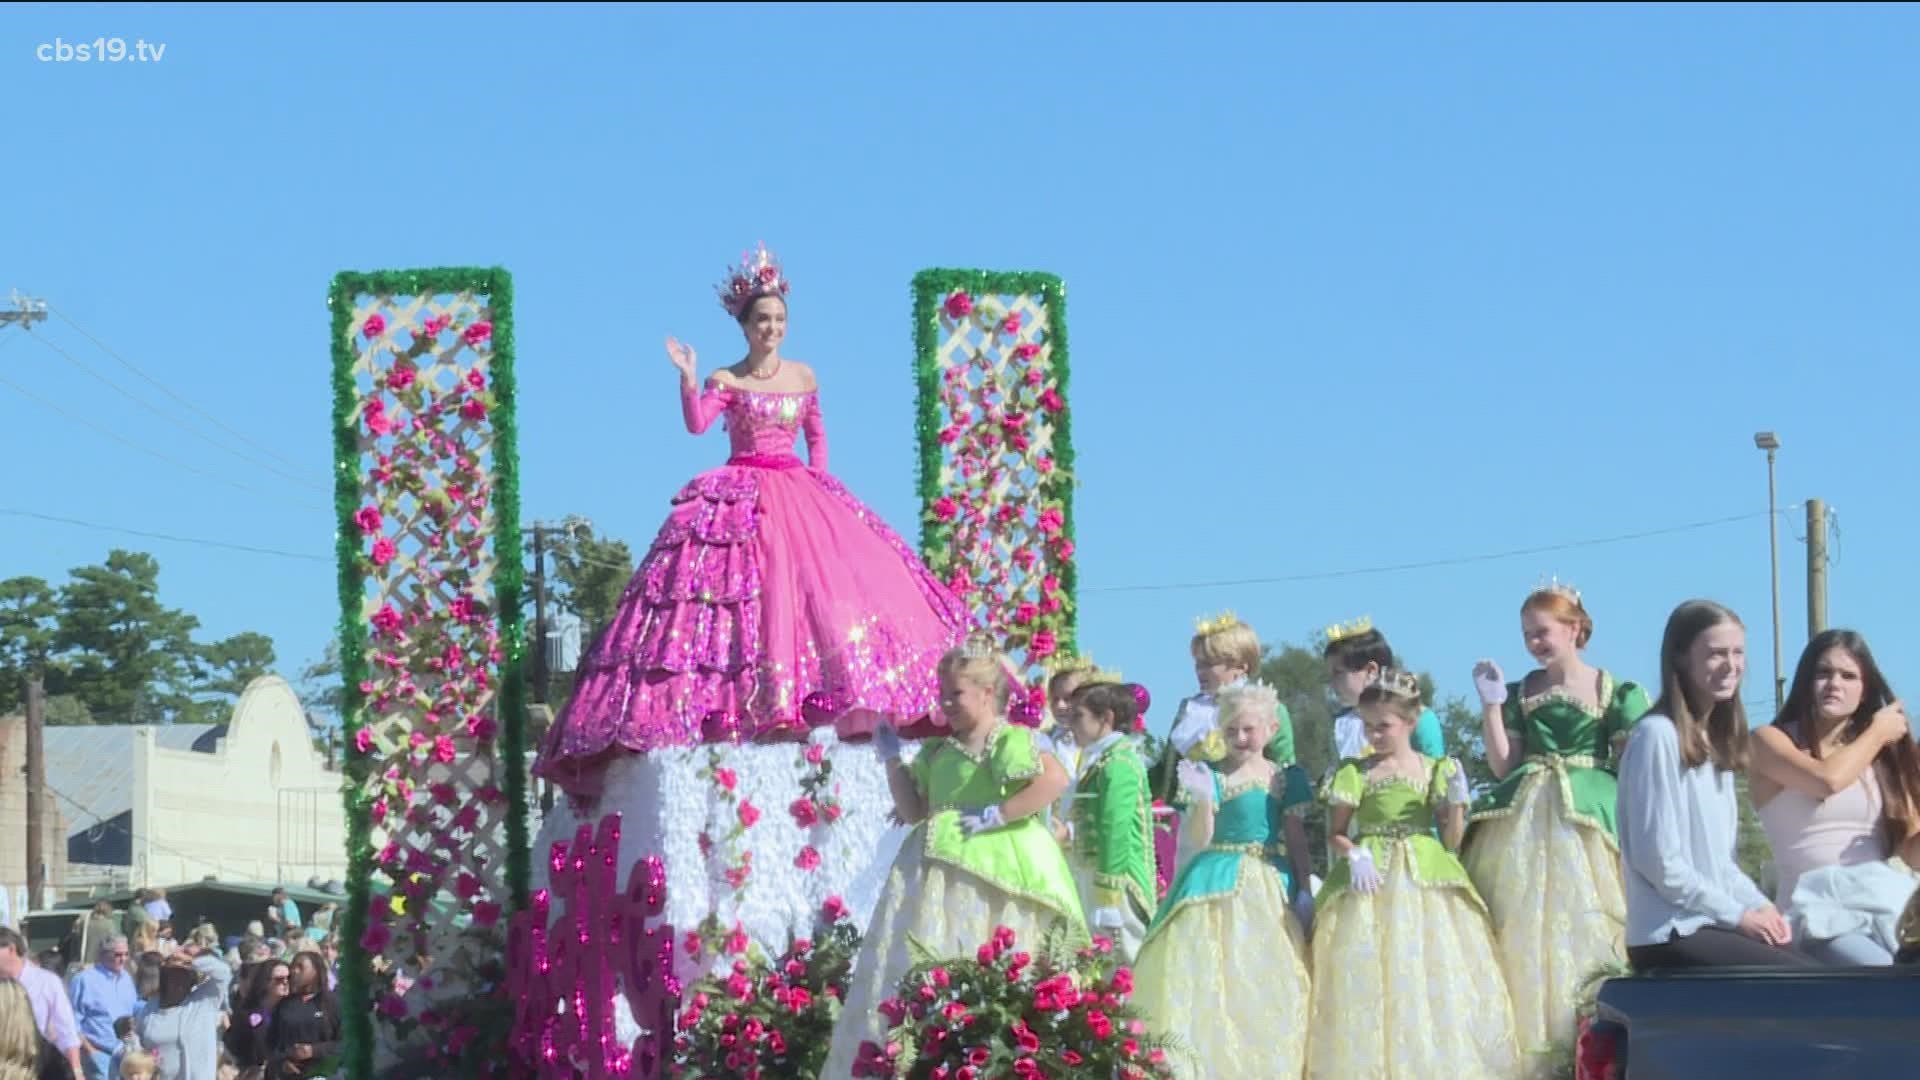 88th annual Texas Rose Festival Parade returns after the 2020 pandemic.